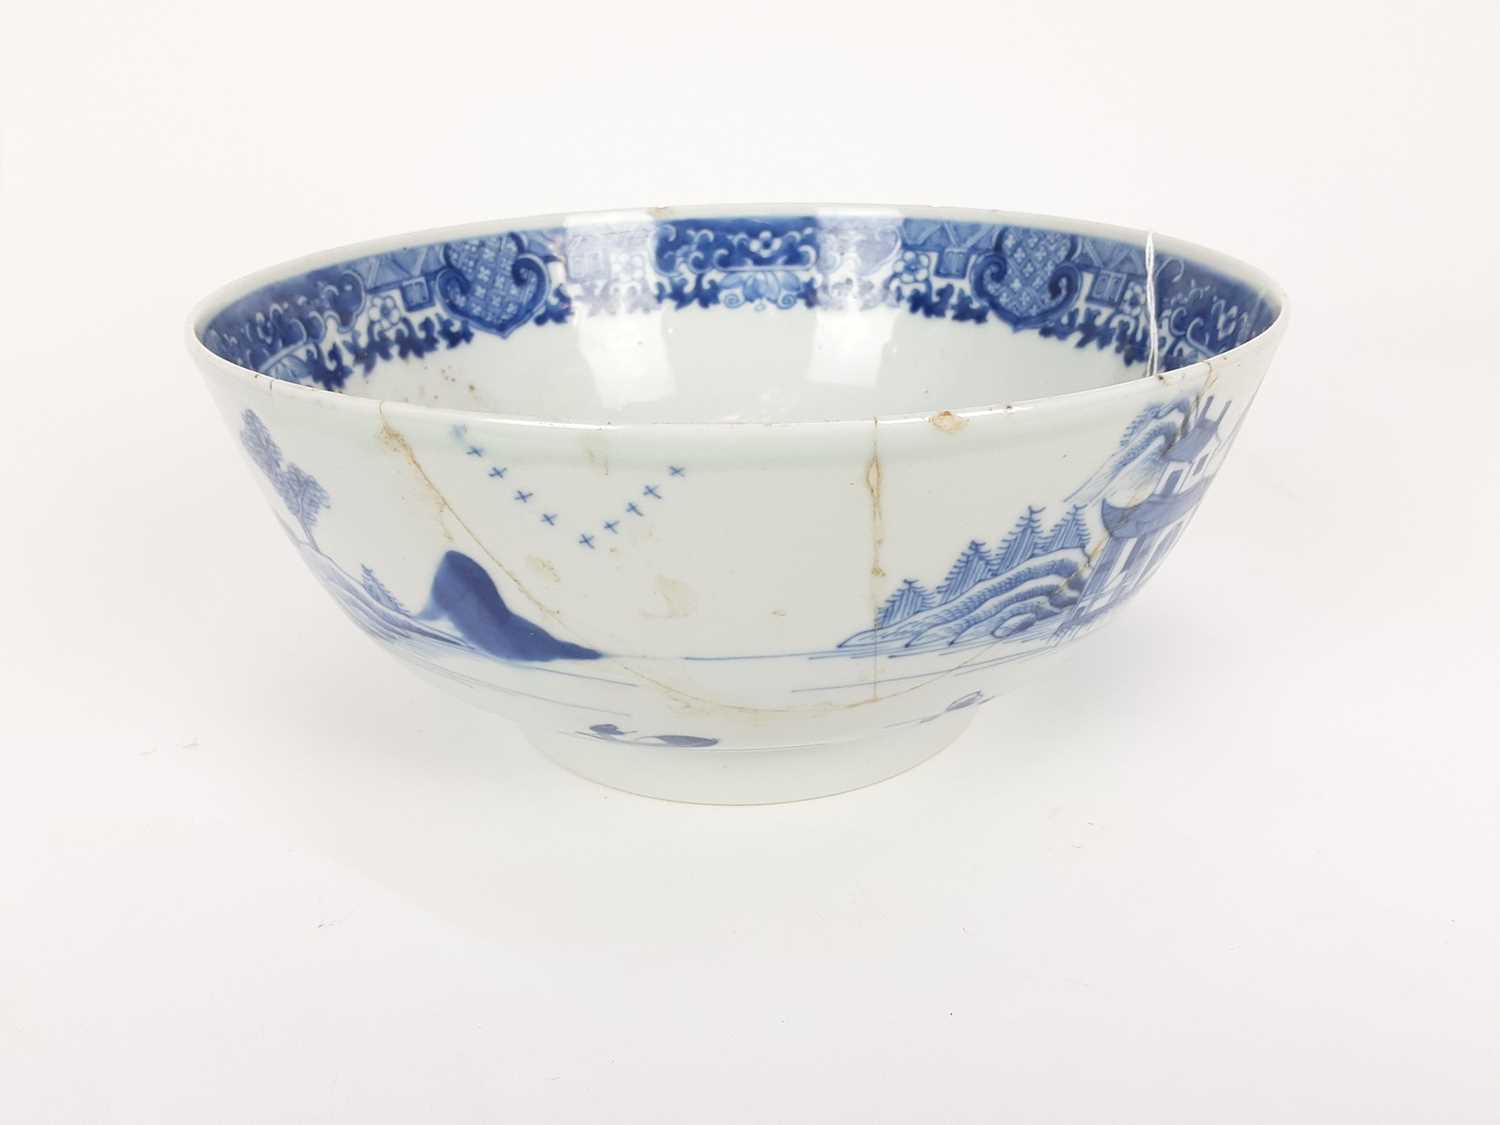 Chinese blue and white export porcelain bowl, late 18th century, painted with landscape scenes... - Image 3 of 6